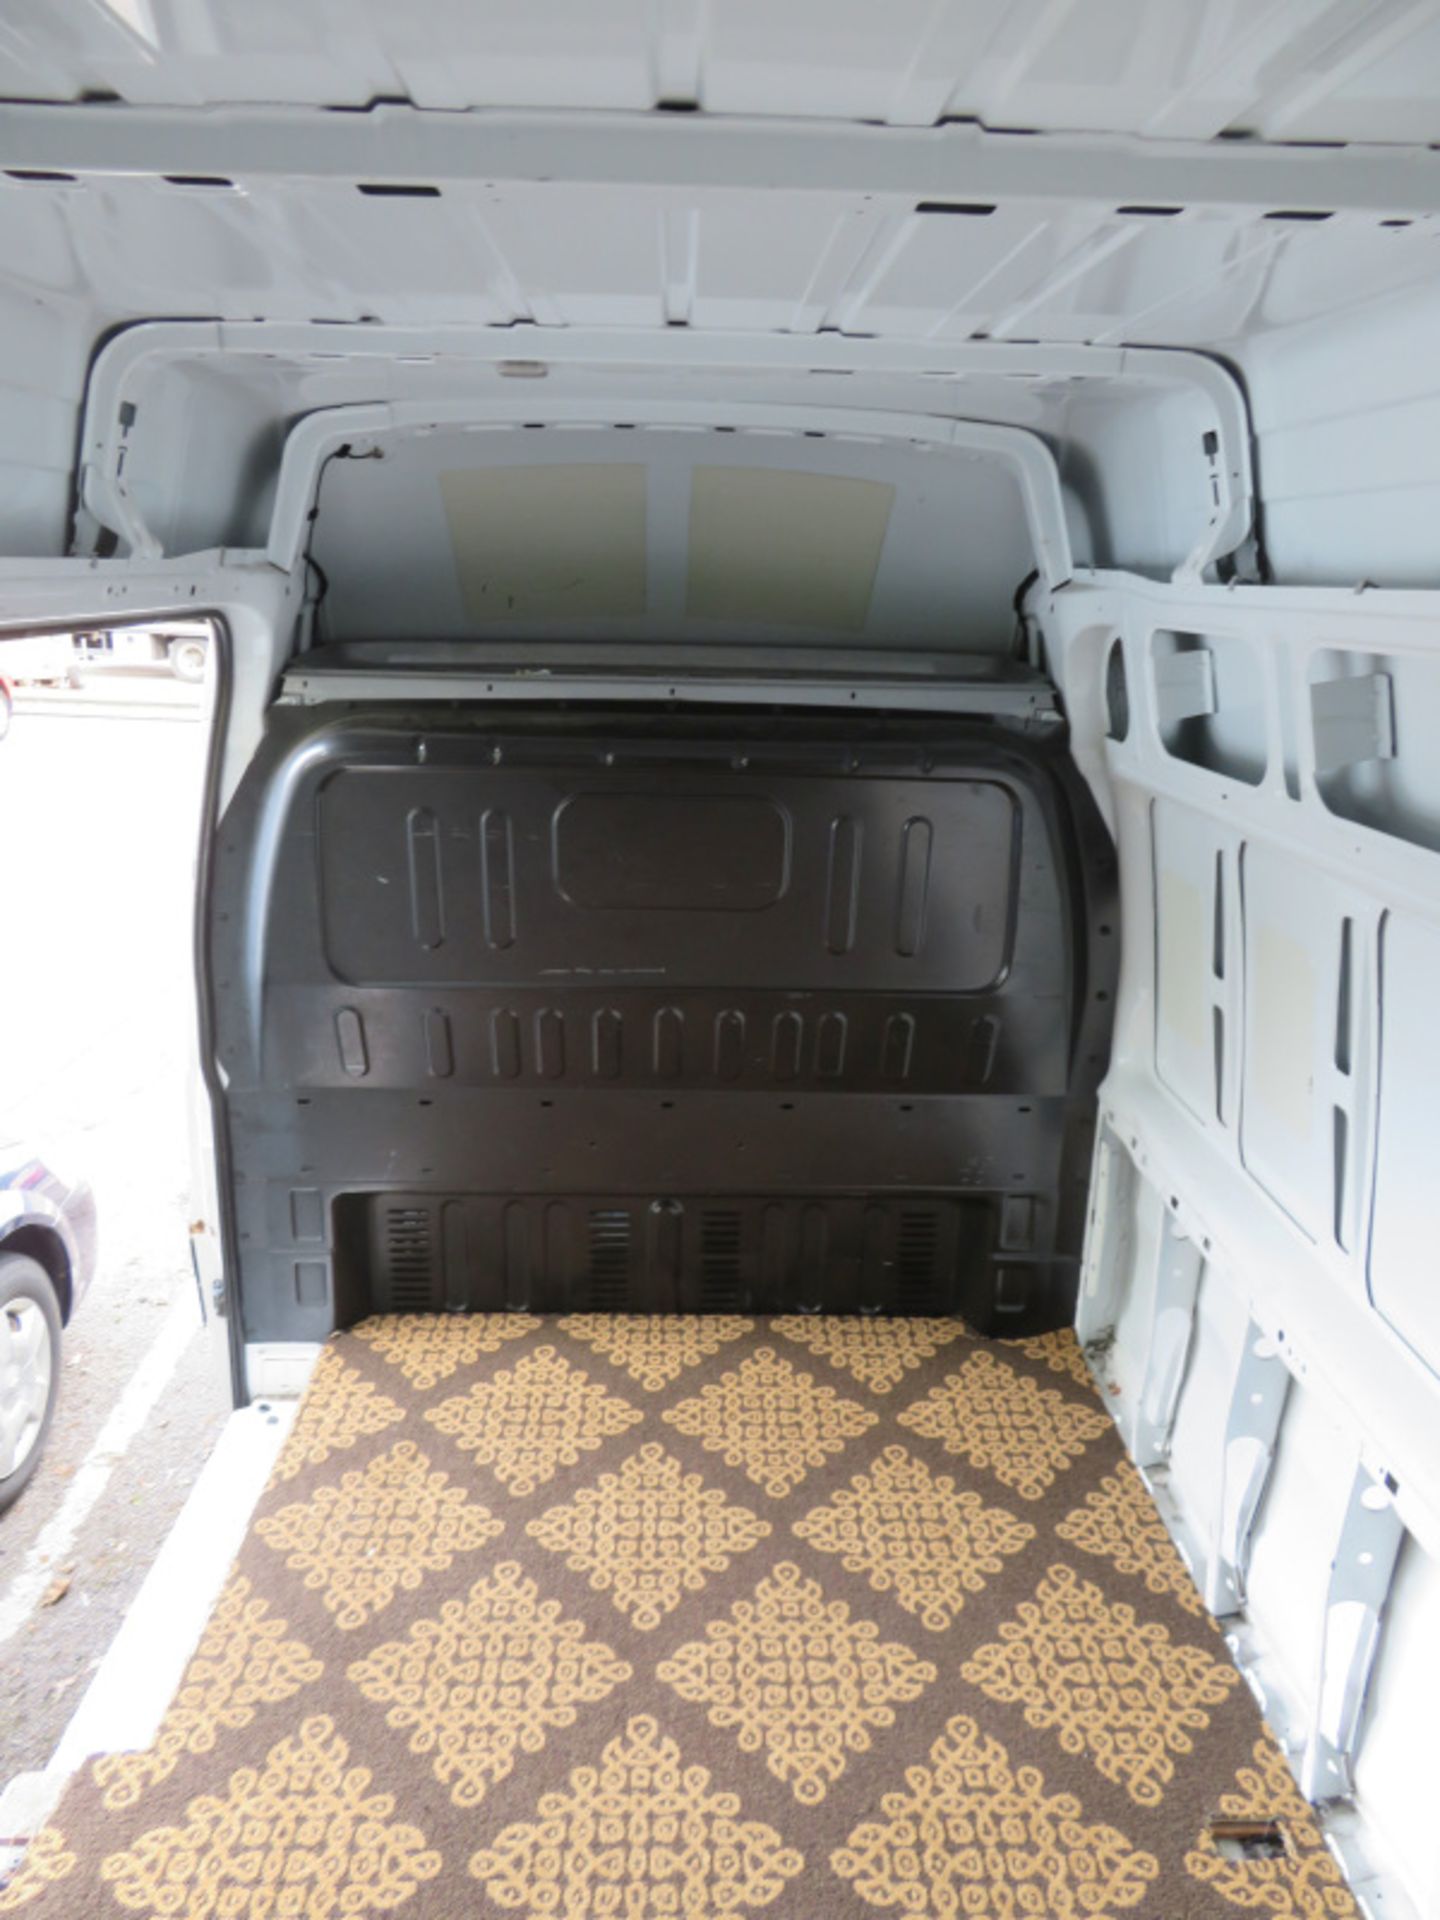 Ford Transit High Van Roof, Petrol, Mileage 33357 mile, Air conditioning, Runs & drives well on - Image 14 of 21